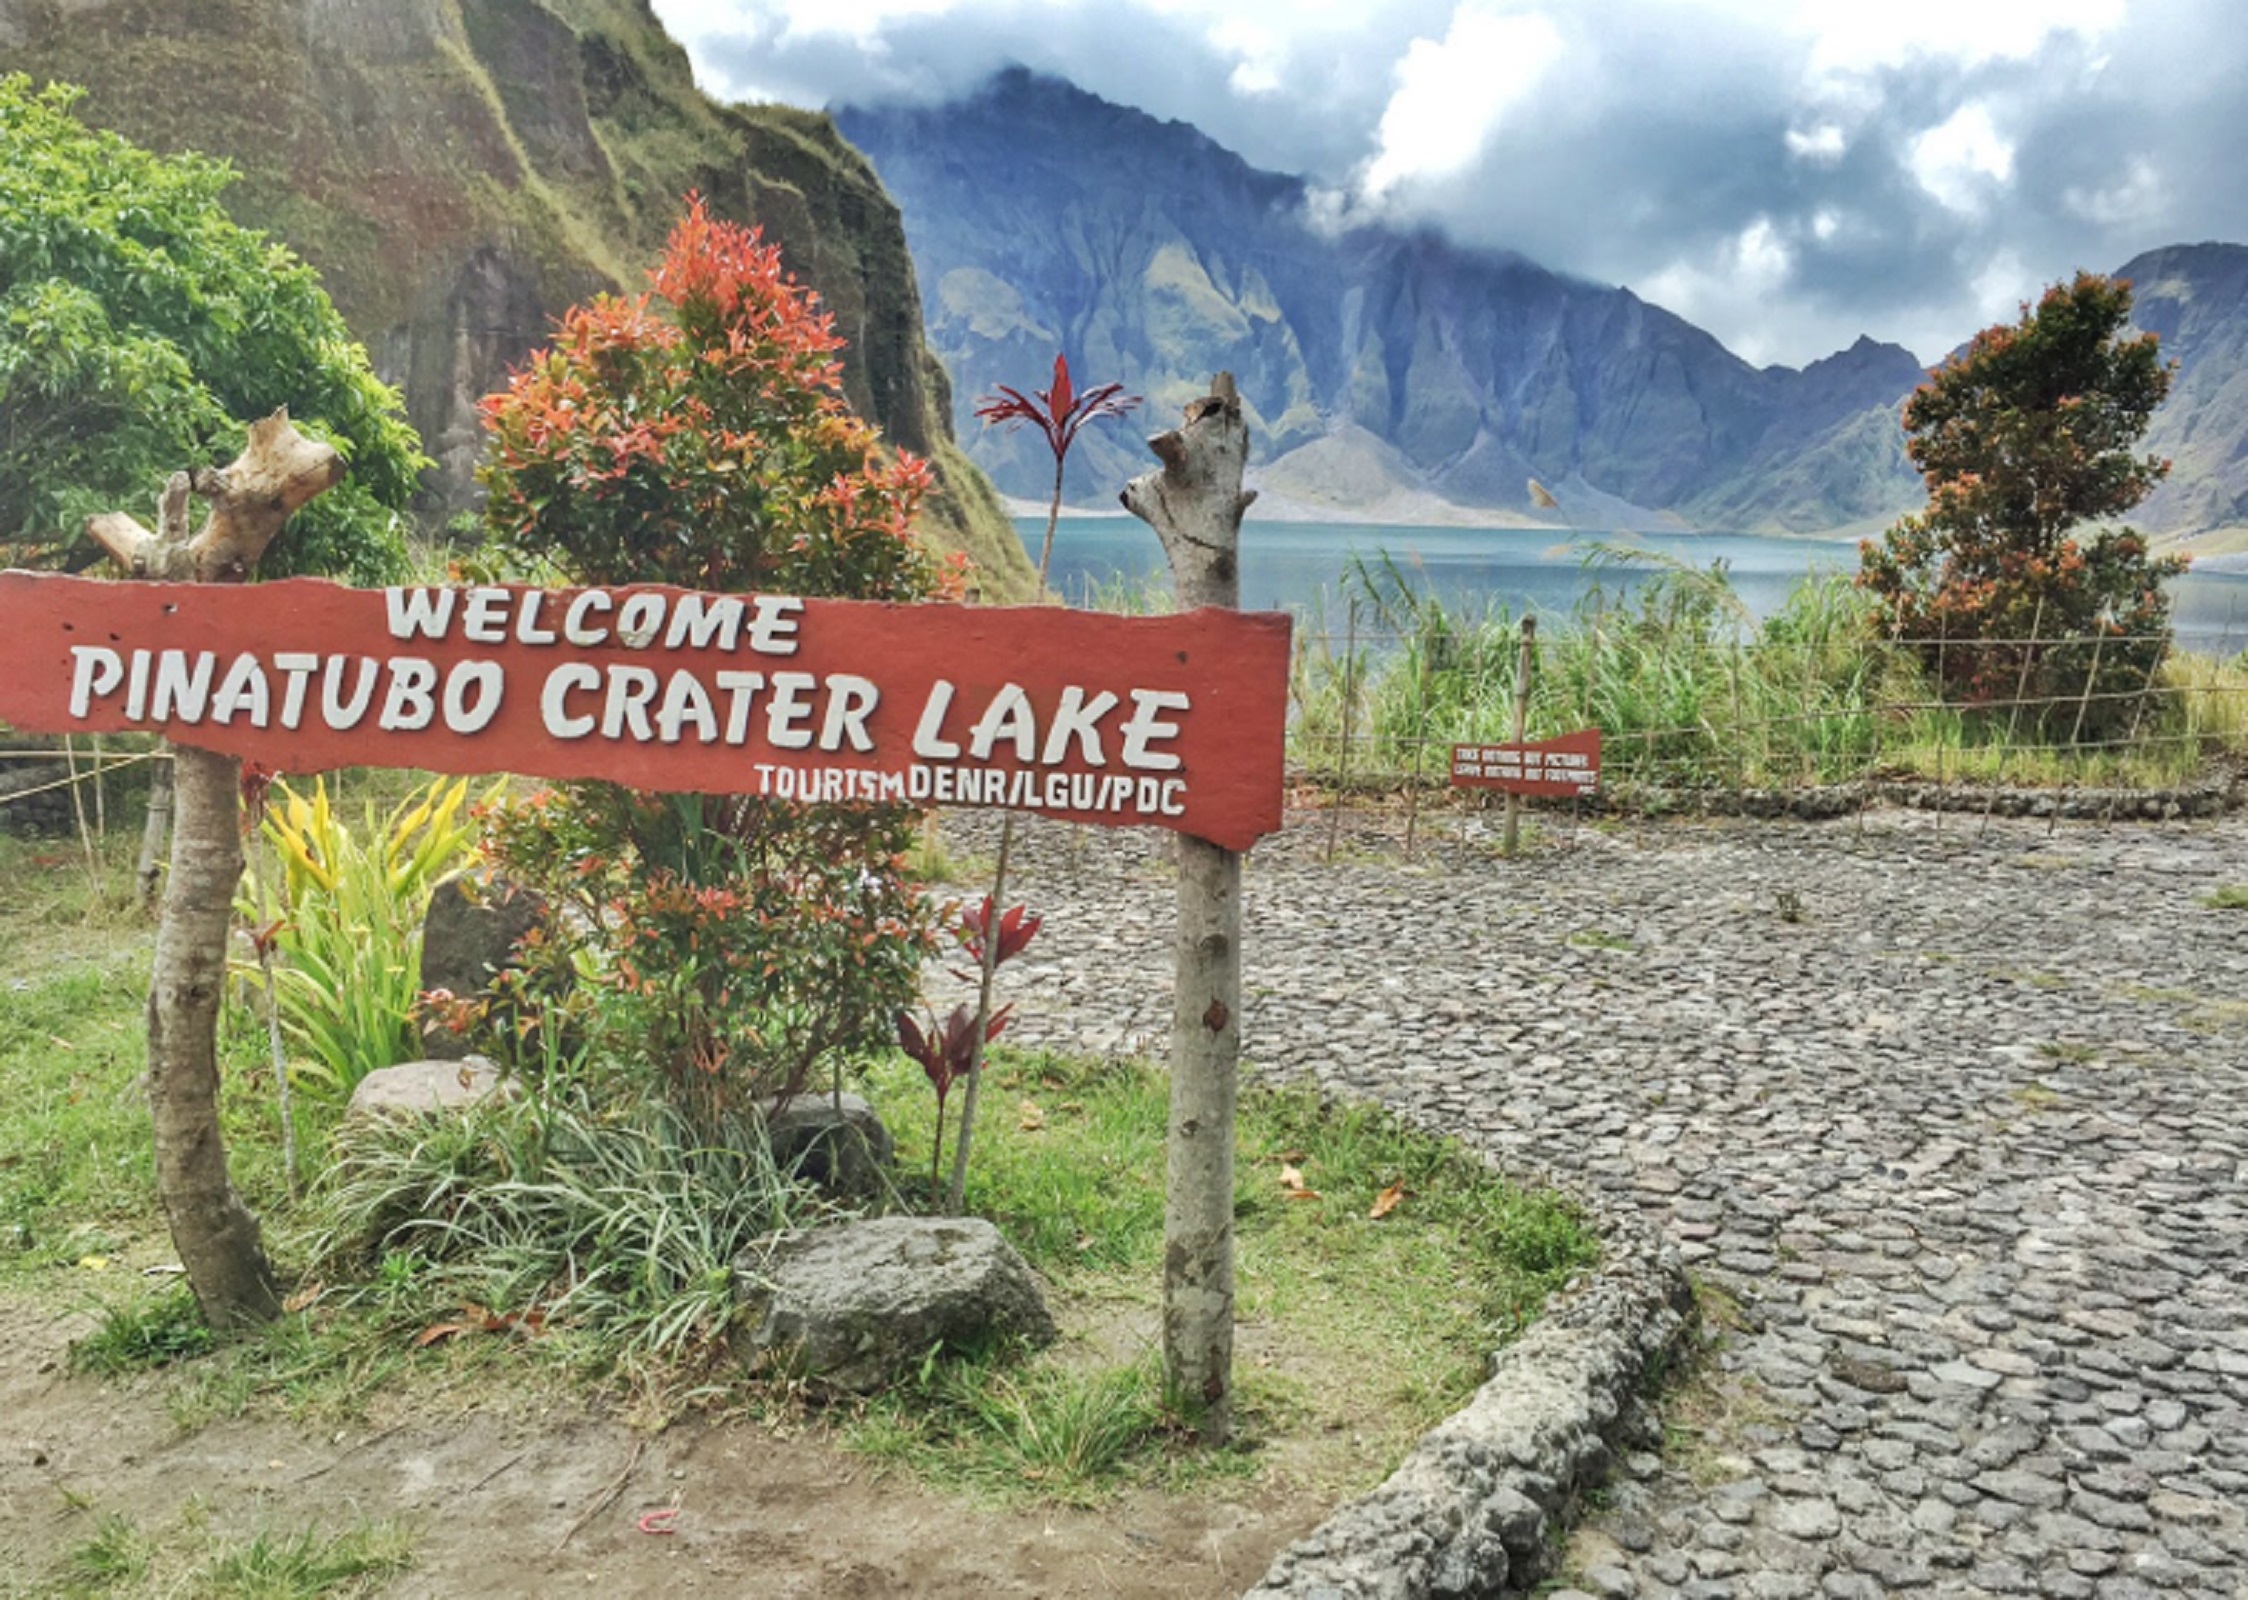 Guided Full Day Hike To Mt Pinatubo Crater Lake With 4x4 2873